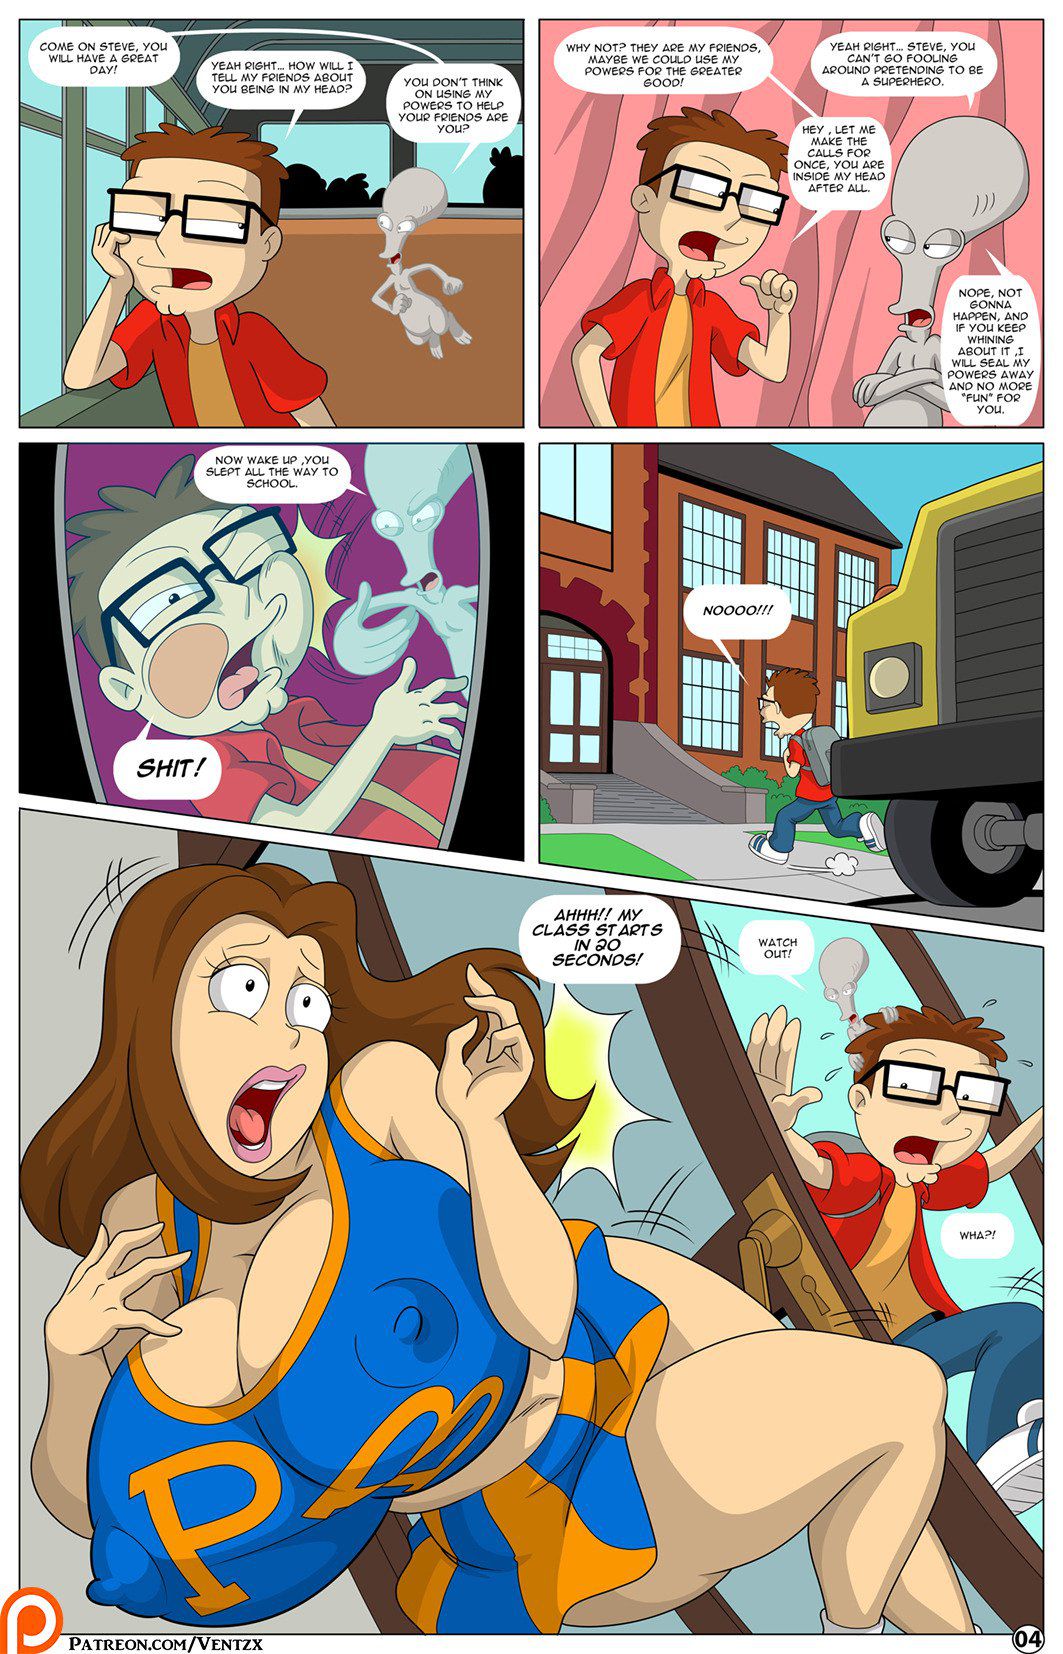 [Arabatos] The Tales of an American Son (American Dad) Chapter 2 (ongoing) 4